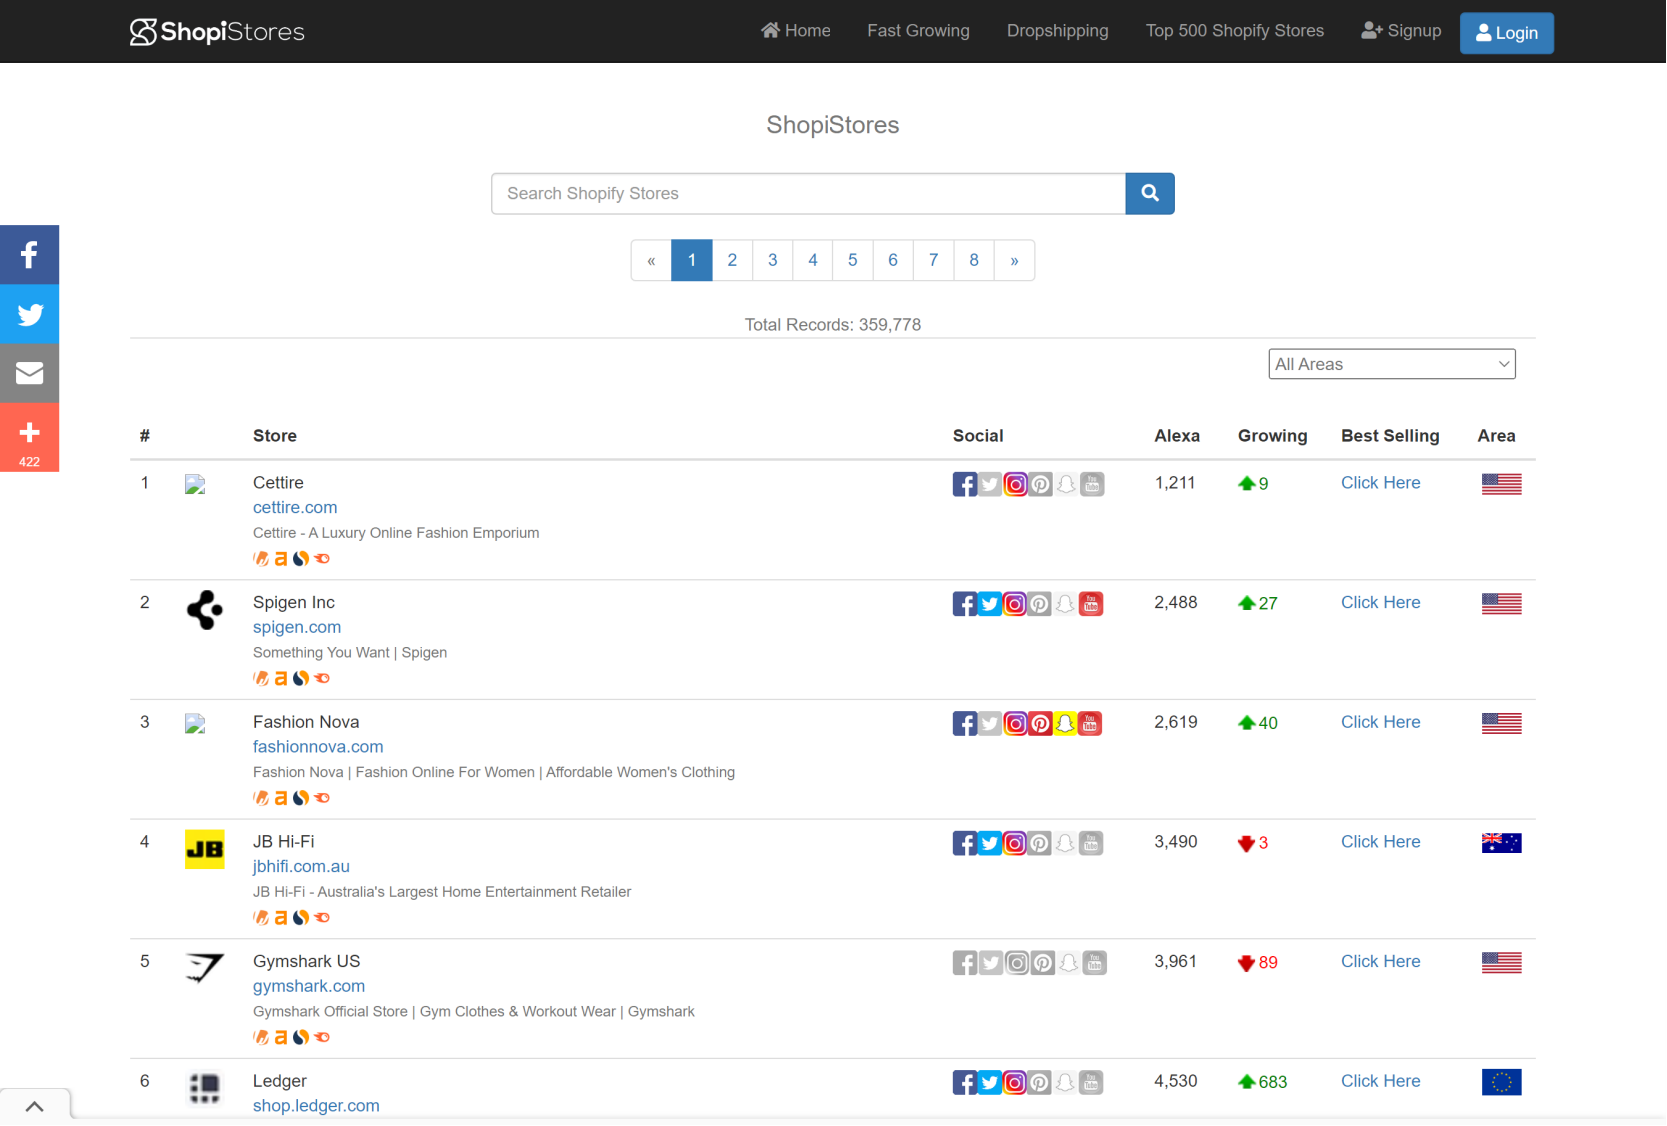 dropshipping-product-research-tool-7-shopistores